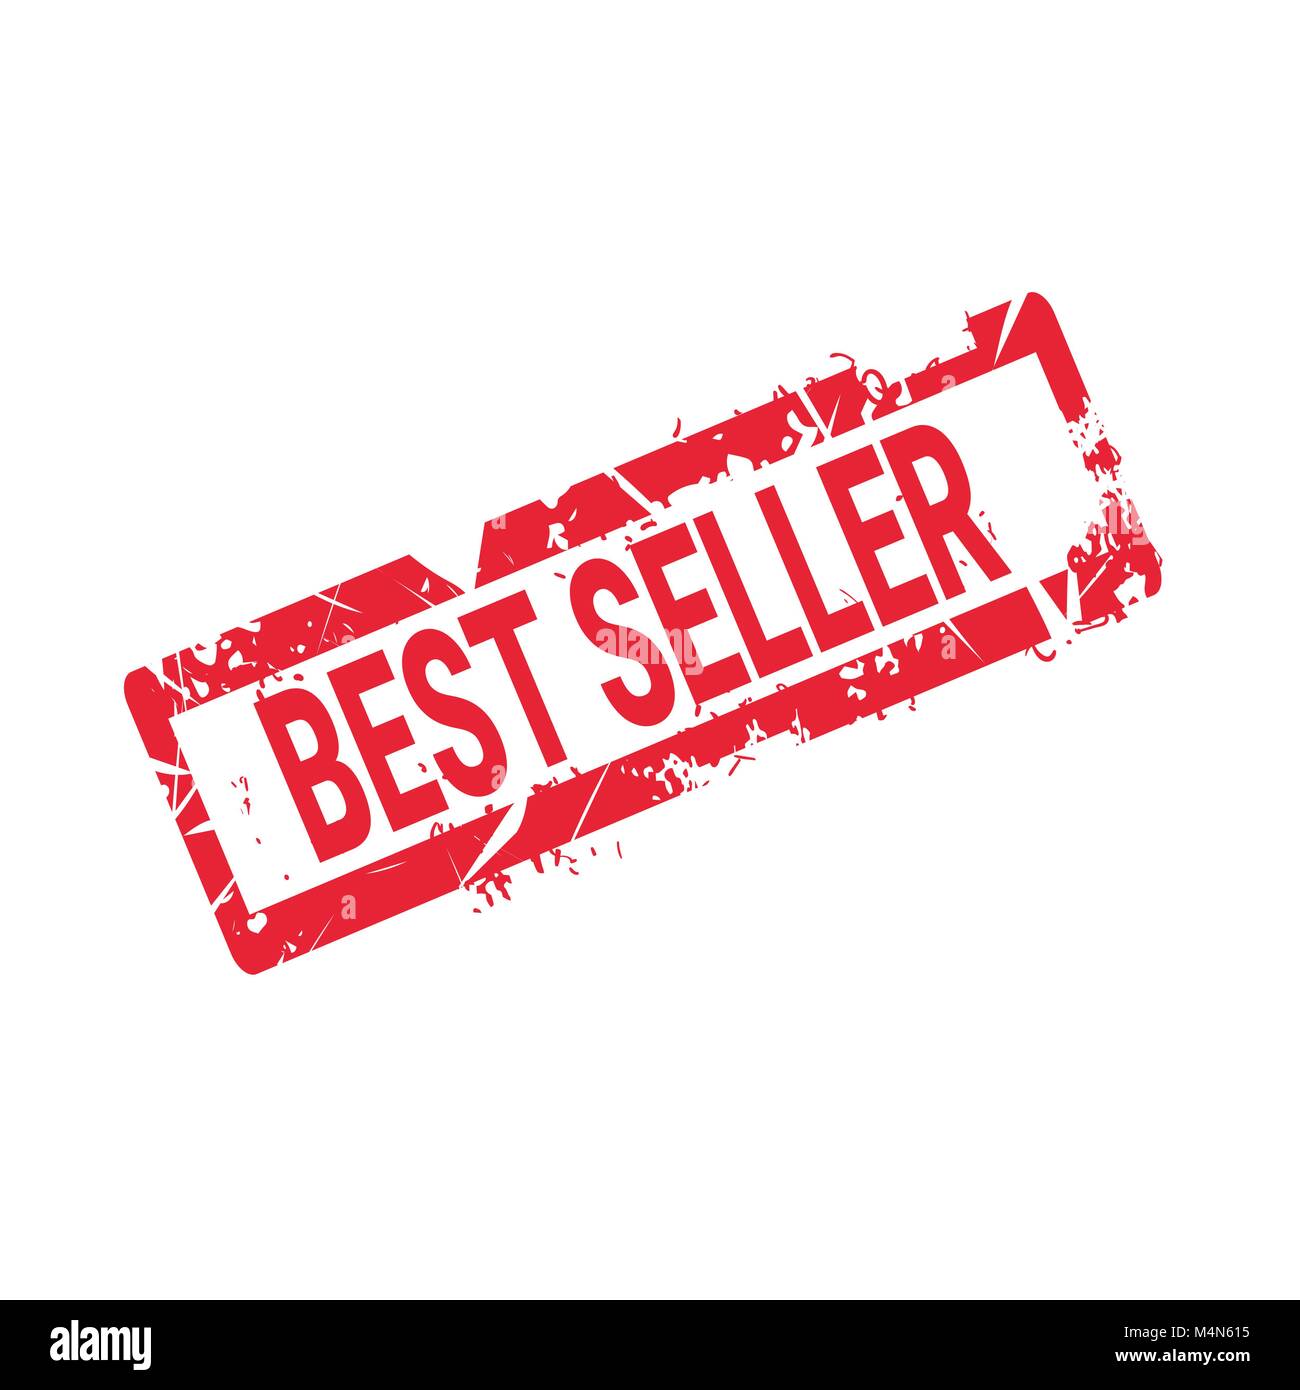 https://c8.alamy.com/comp/M4N615/best-seller-stamp-rubber-seal-red-grunge-label-isolated-sticker-icon-M4N615.jpg